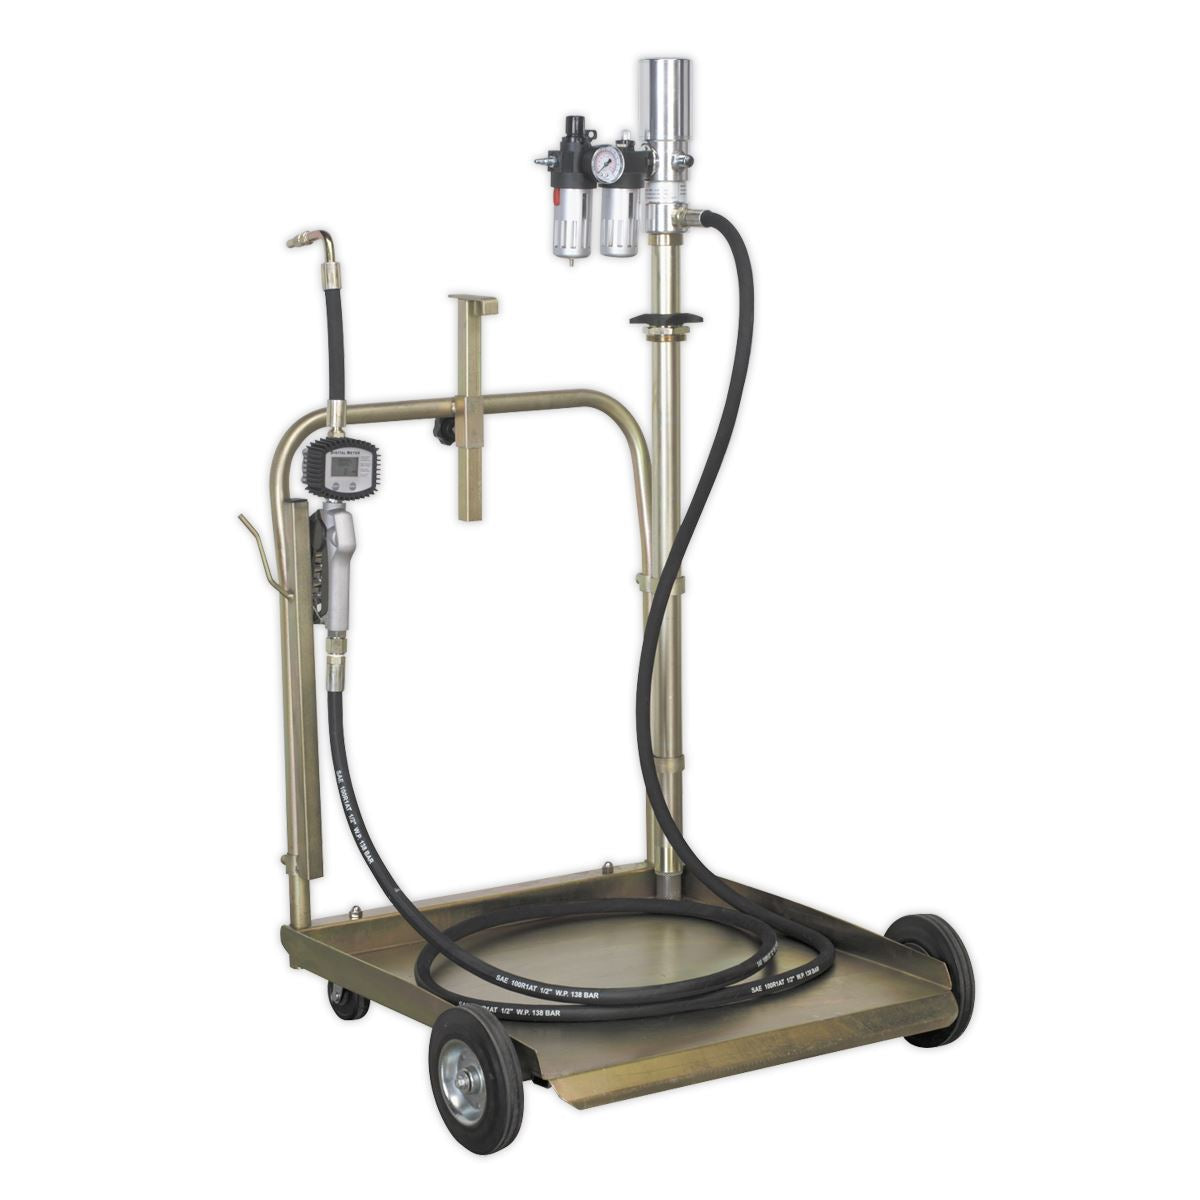 Sealey Oil Dispensing System Air Operated